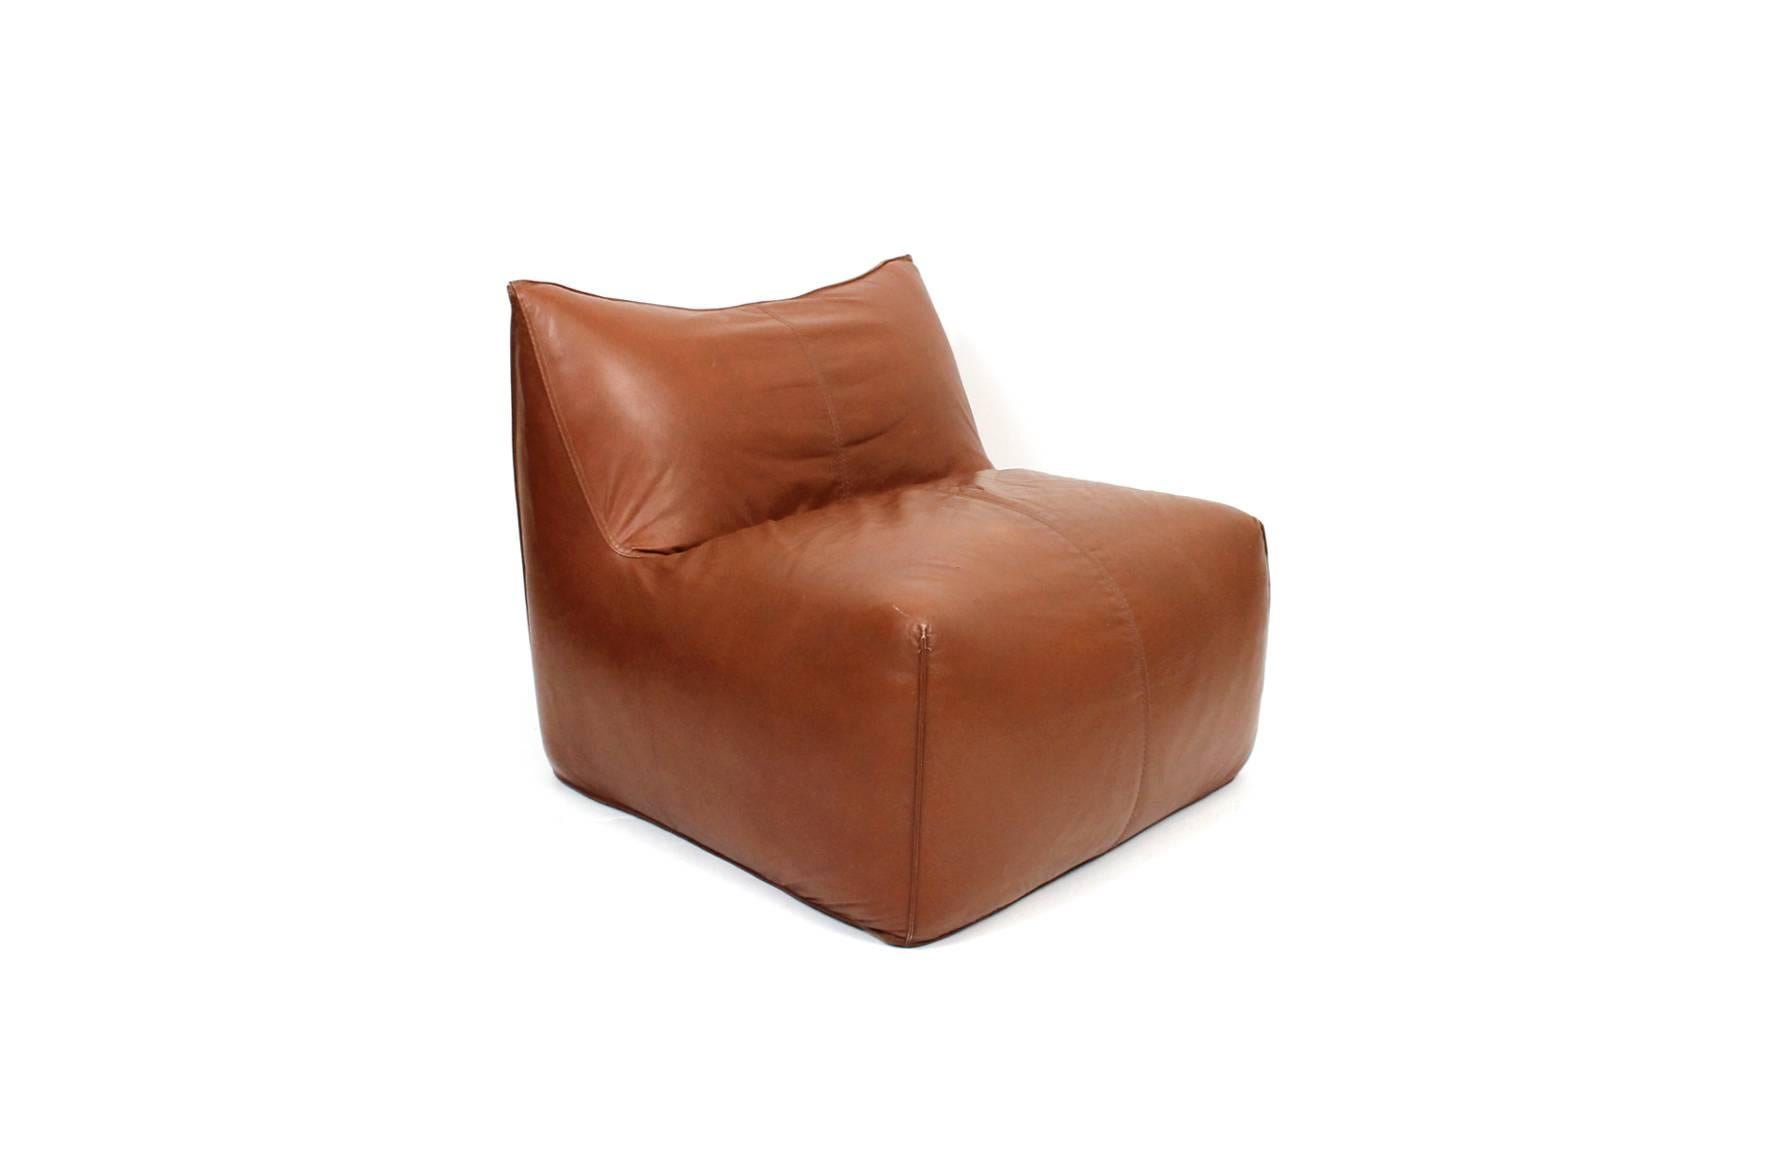 Armless lounge chair designed by Mario Bellini and produced by B&B Italia in the 1970s. From the “Le Bombole” series this chair is in highly desirable leather. Very comfortable lounge chair.